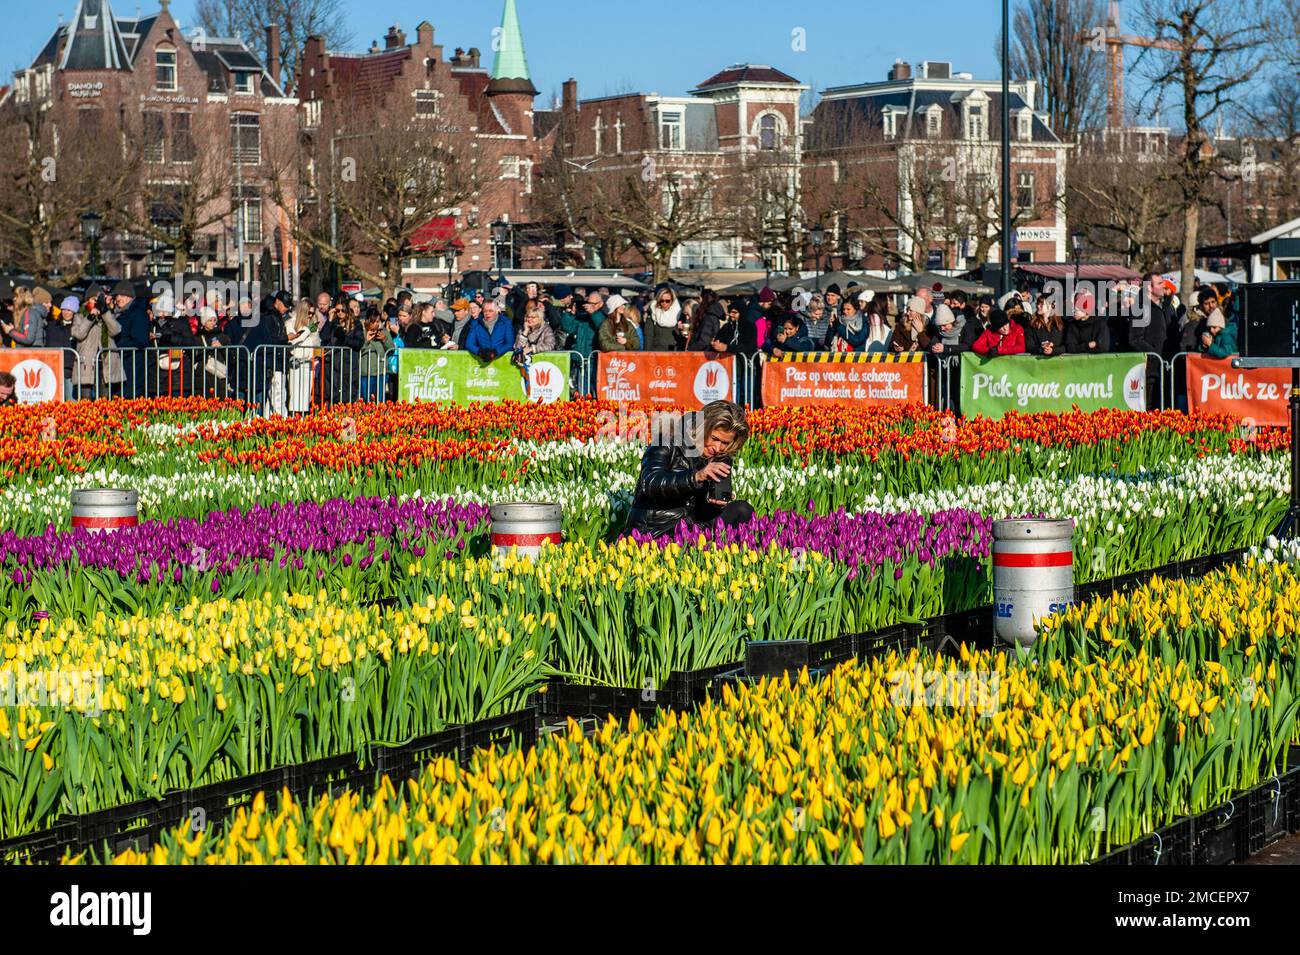 A woman seen taking a photo of the tulips. Each year on the 3rd Saturday of January, the National Tulip Day is celebrated in Amsterdam. Dutch tulip growers built a huge picking garden with more than 200,000 colorful tulips at the Museumplein in Amsterdam. Visitors are allowed to pick tulips for free. The event was opened by Olympic skating champion, Irene Schouten. Prior to the opening, she christened a new tulip: Tulipa 'Dutch Pearl' as a reference to the world - famous painting 'The girl with a pearl earring' by Johannes Vermeer. Stock Photo